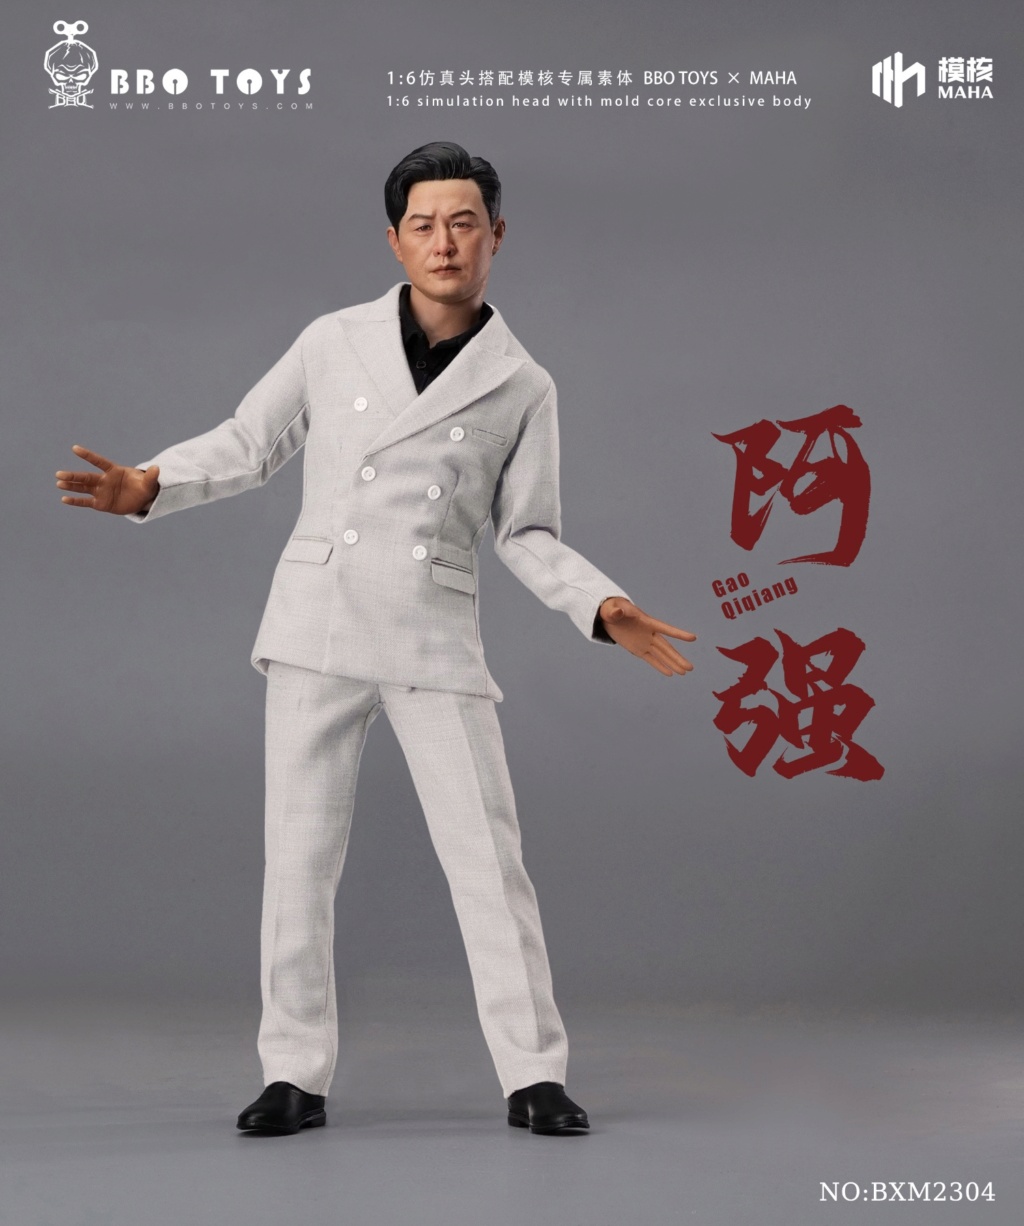 BBoToys - NEW PRODUCT: BBOToys: 1/6 A Qiang 12-inch action figure with suit (new body type) 15304410